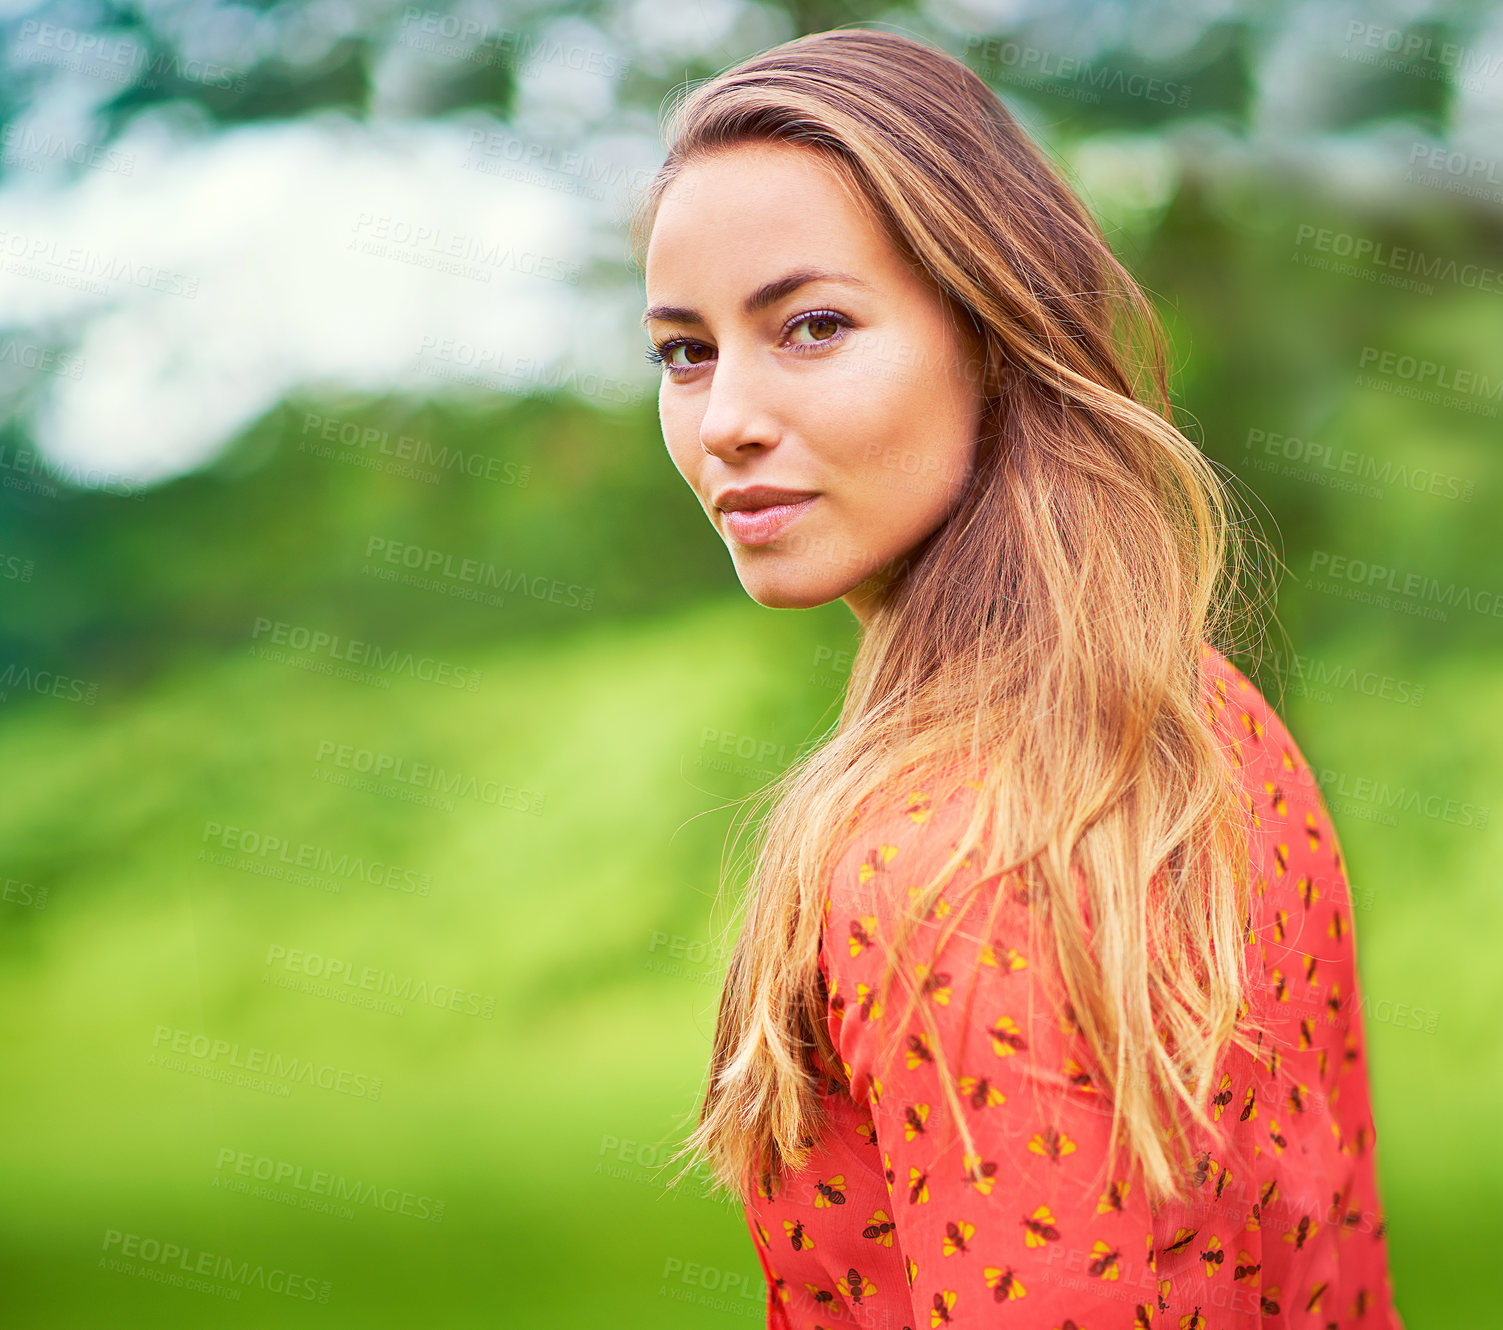 Buy stock photo Cropped portrait of a young woman standing in the outdoors